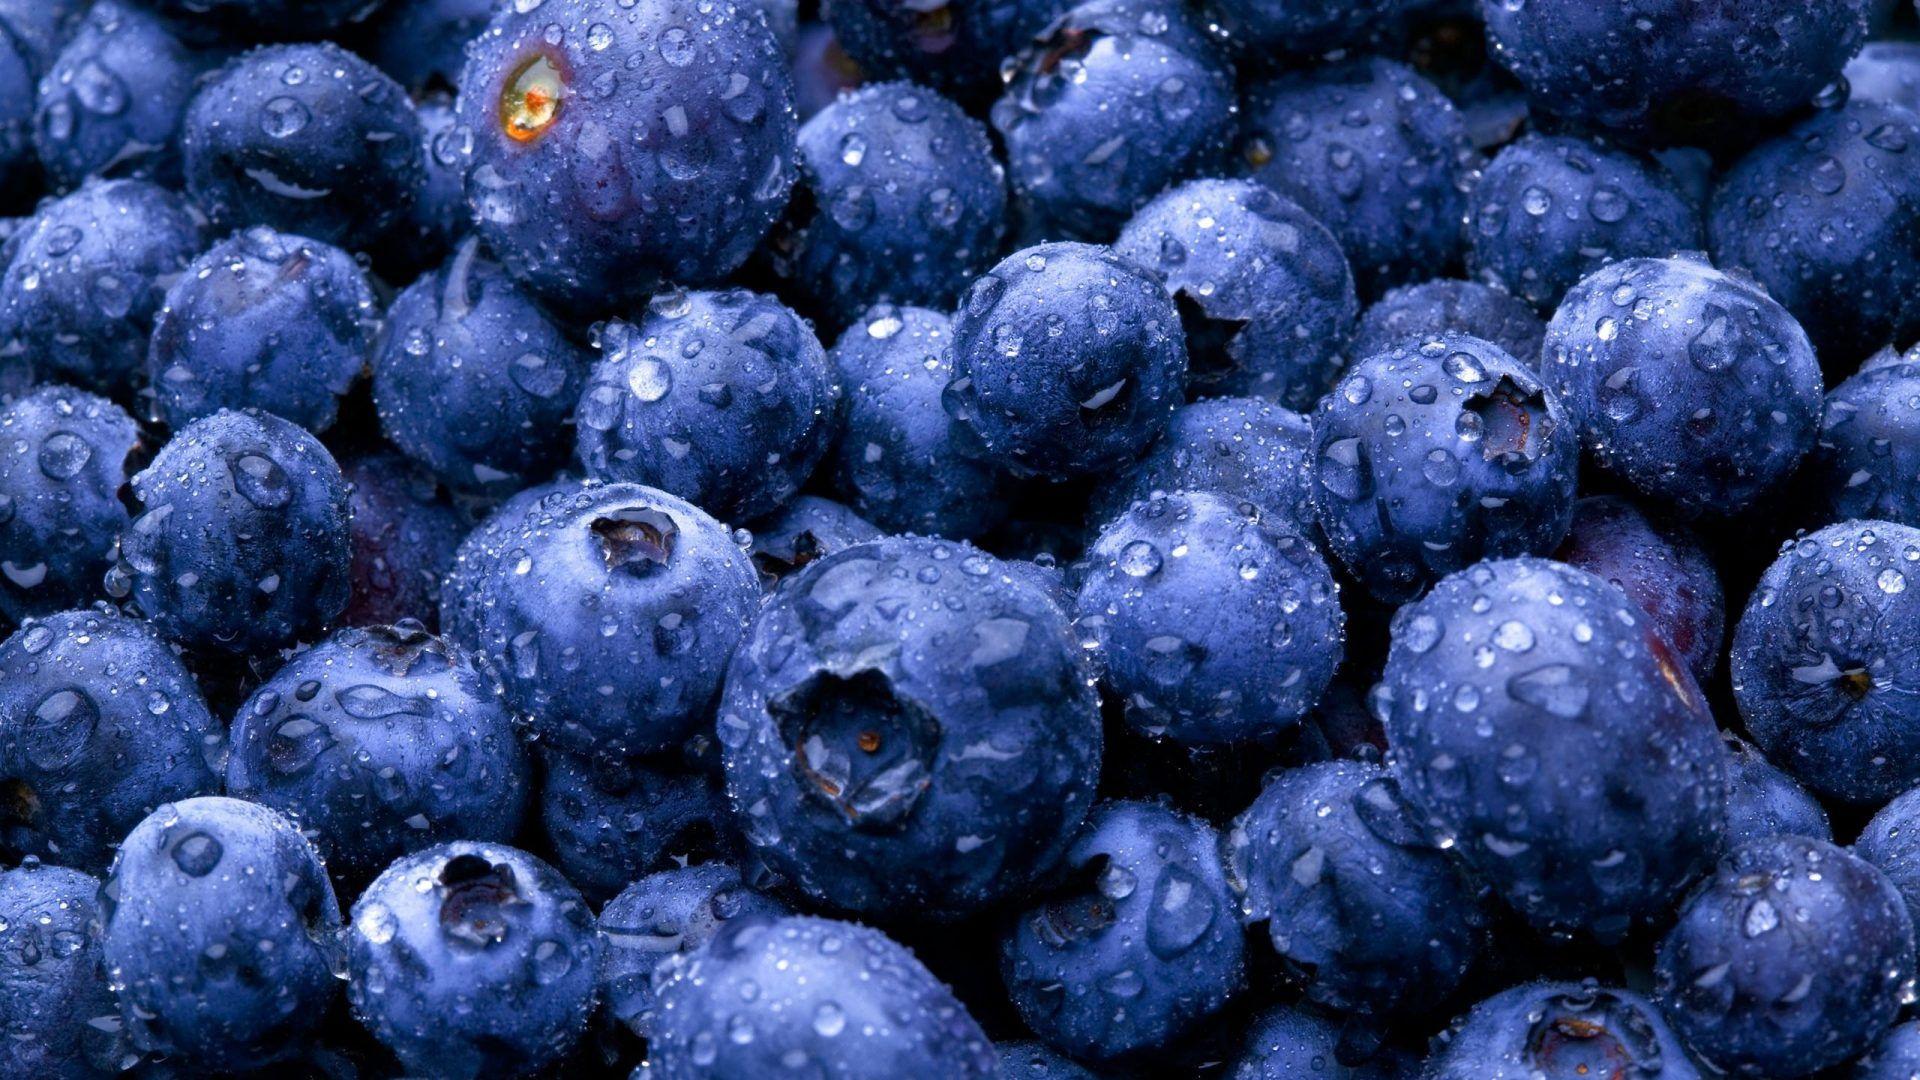 Food Tag wallpaper: Nature Water Fruits Drops Blueberries Food